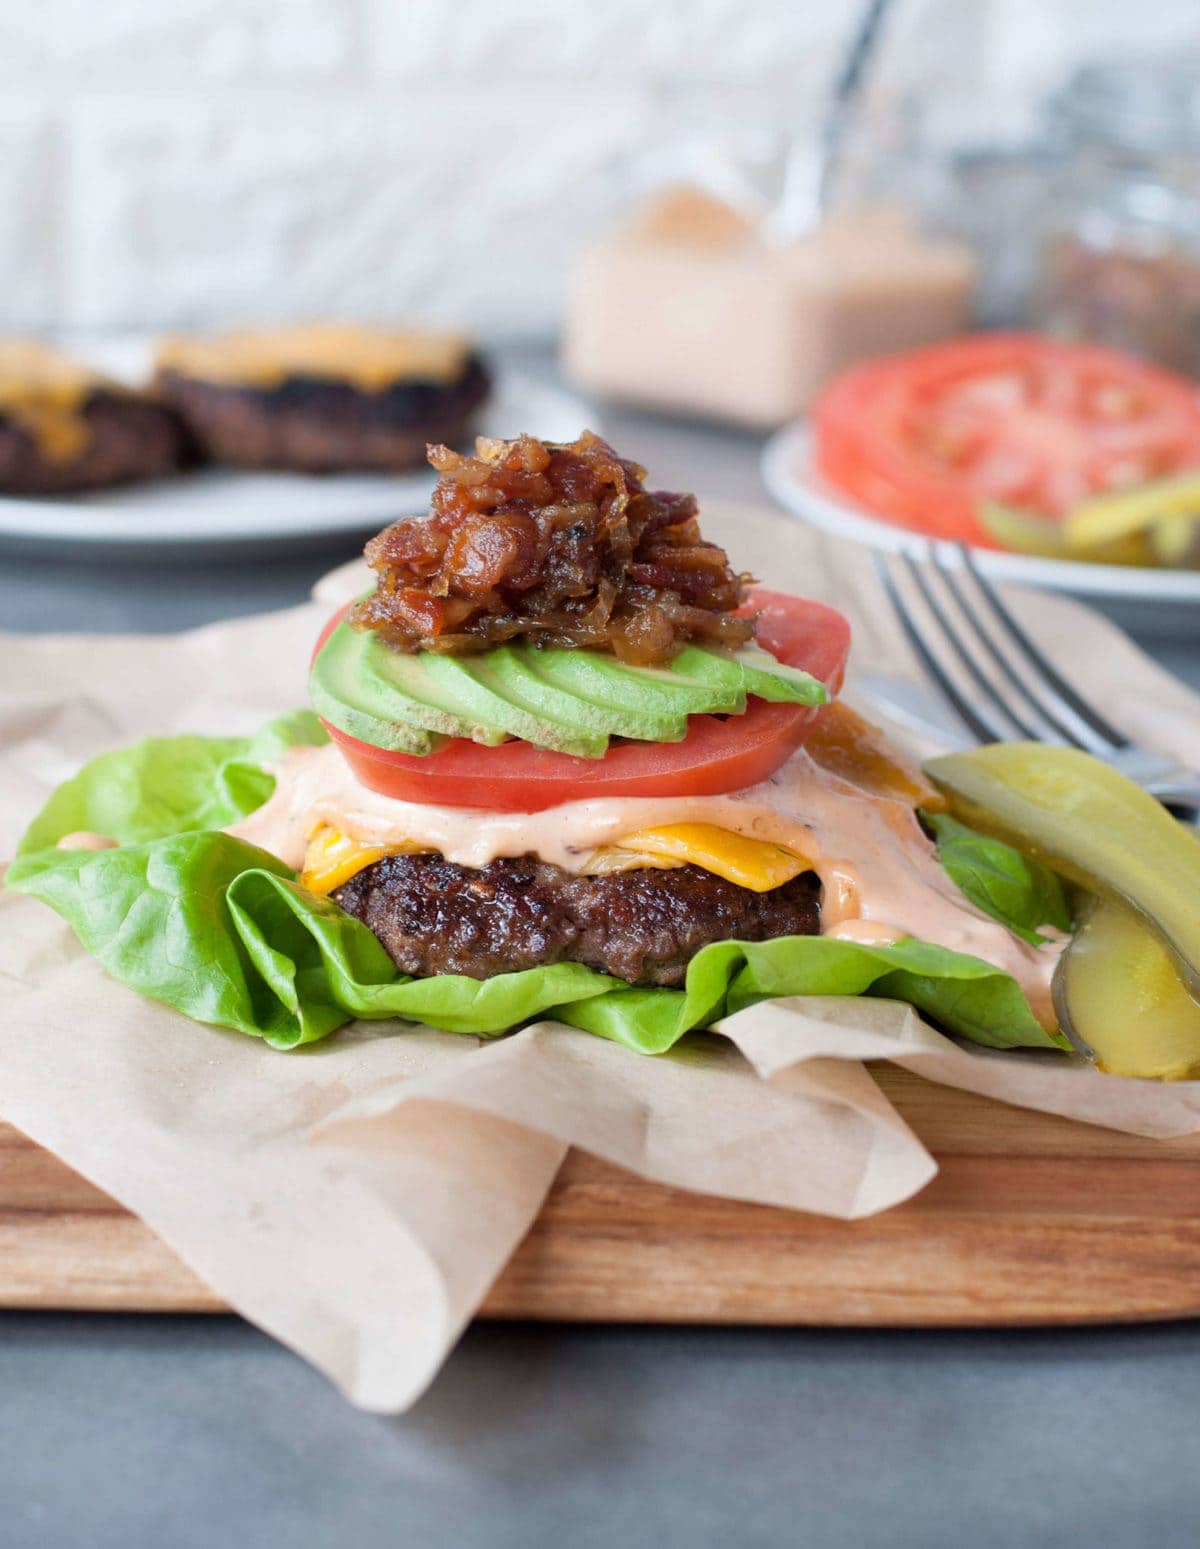 a juicy burger topped with cheese, burger sauce, tomato, avocado, bacon jam, and pickles